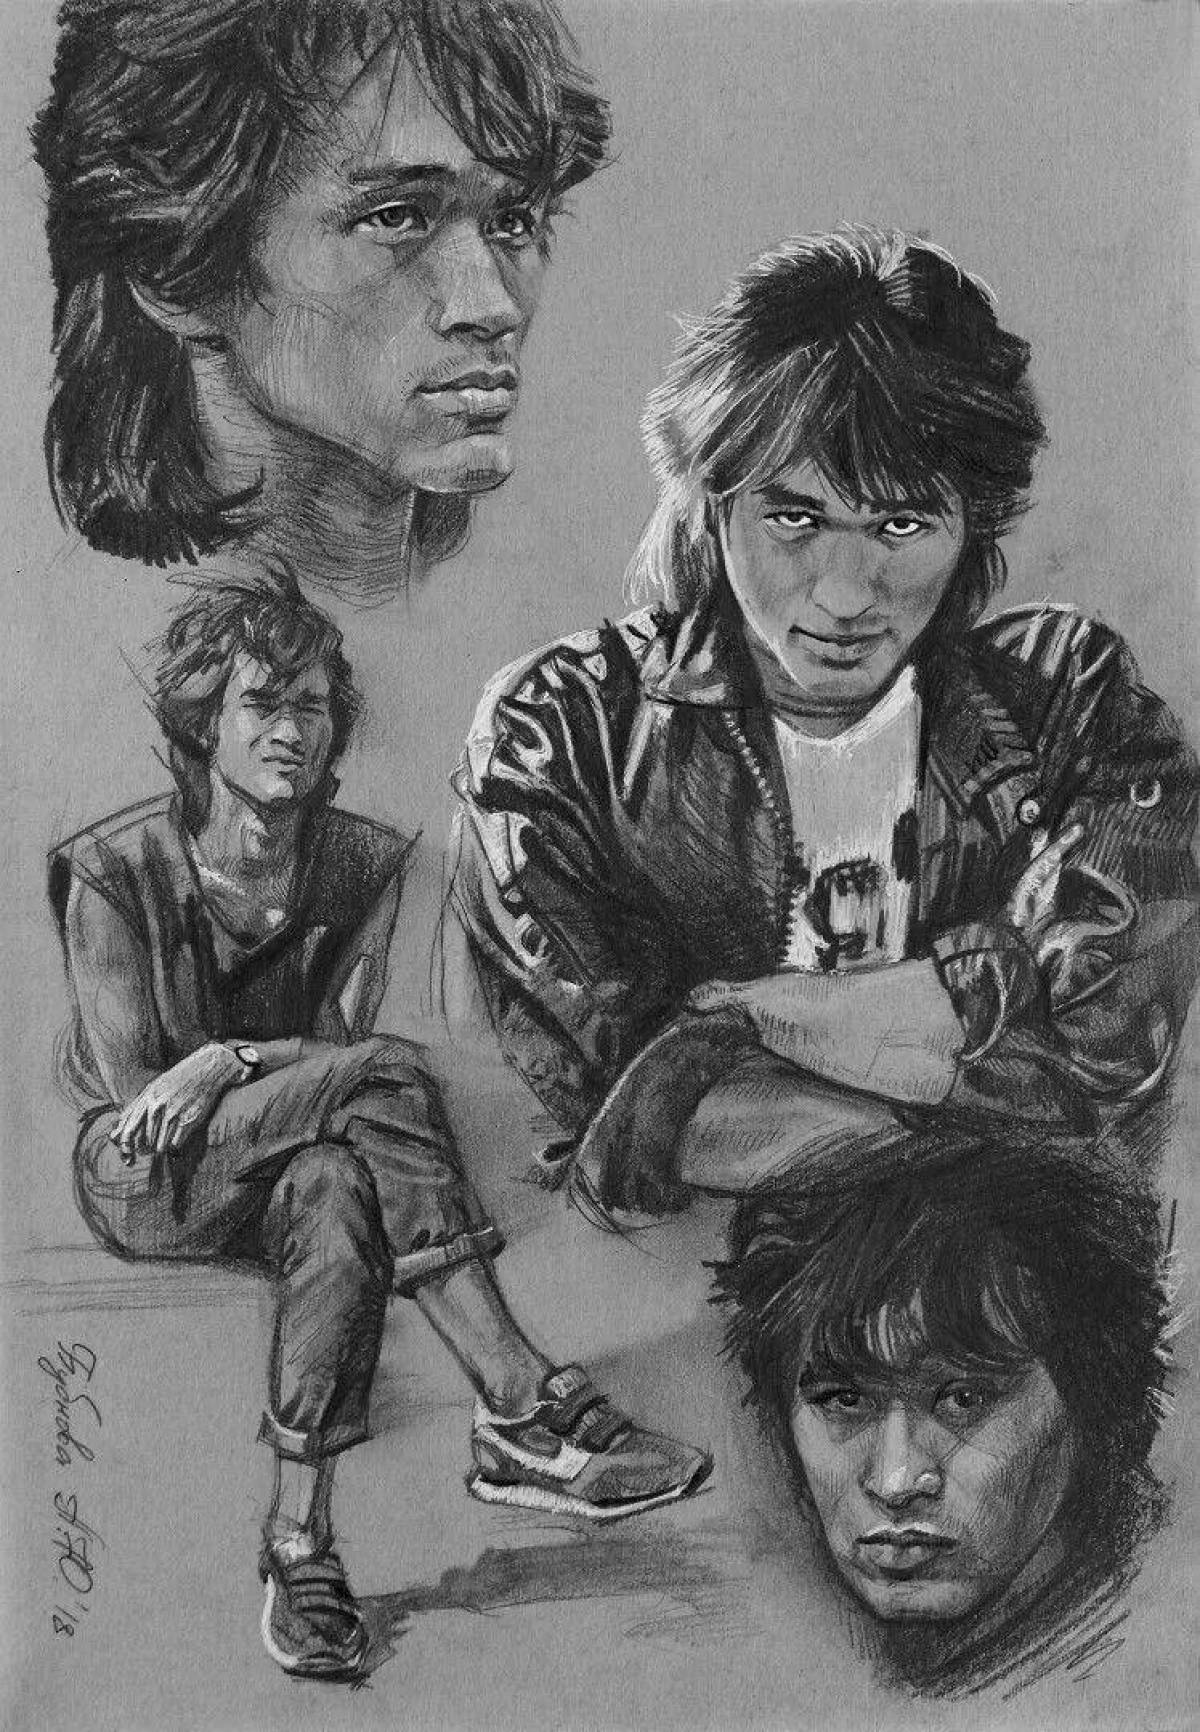 Victor Tsoi's attraction coloring book